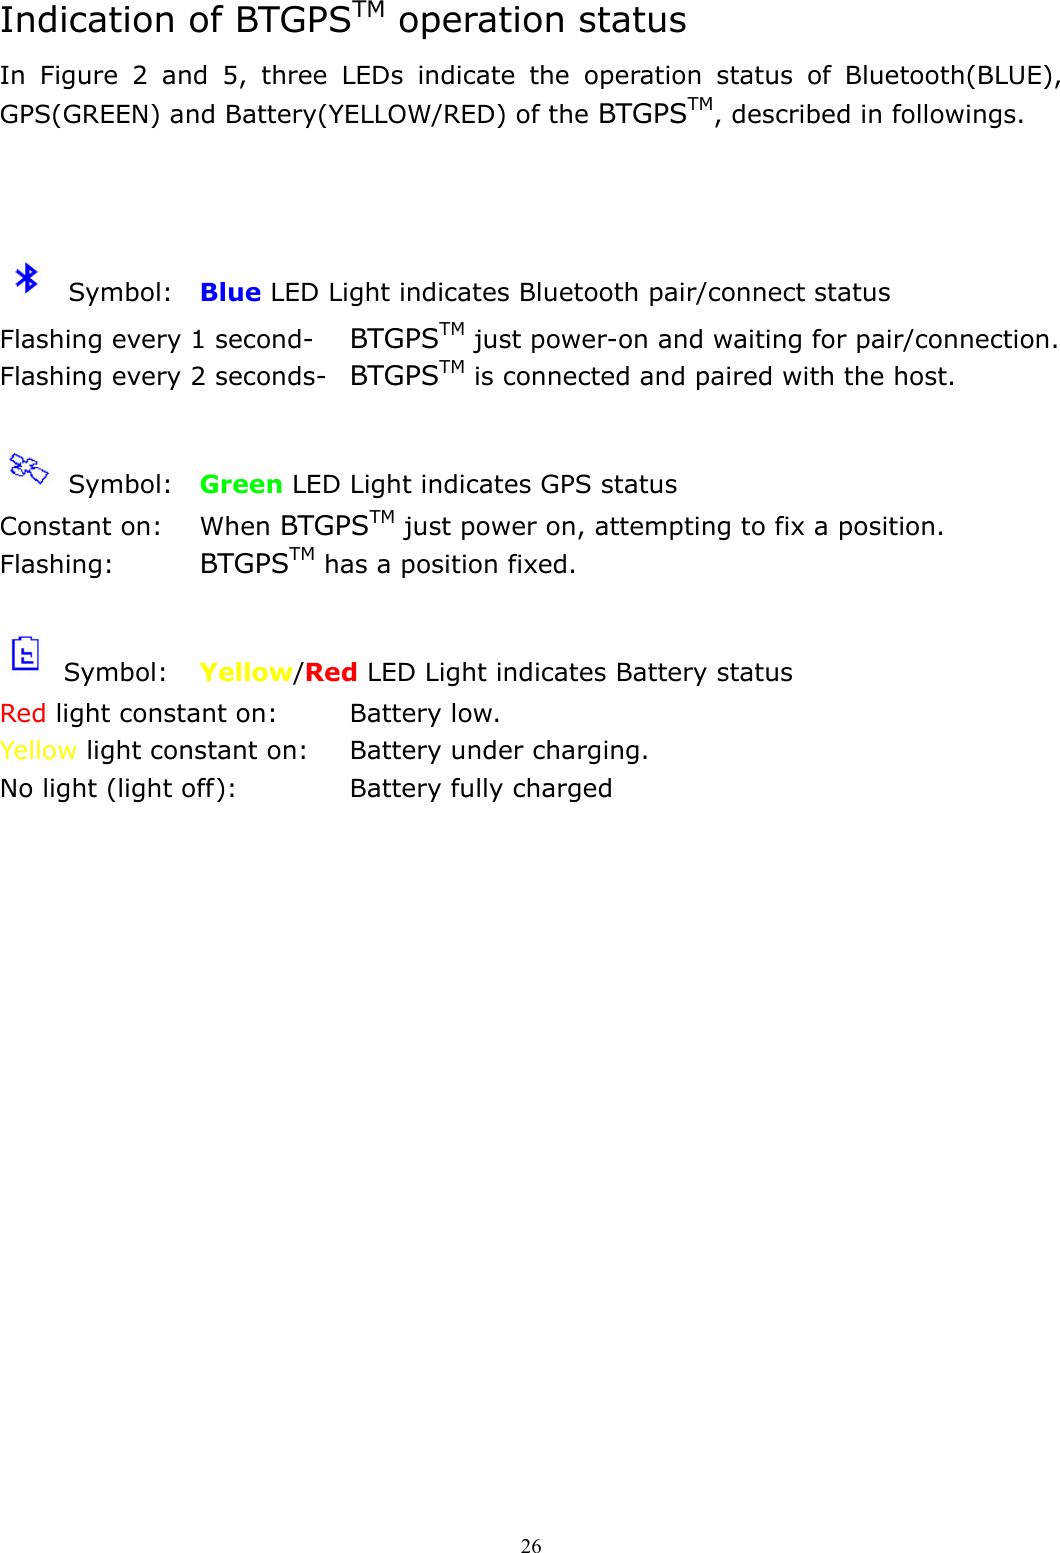  26Indication of BTGPSTM operation status In Figure 2 and 5, three LEDs indicate the operation status of Bluetooth(BLUE), GPS(GREEN) and Battery(YELLOW/RED) of the BTGPSTM, described in followings.     Symbol:  Blue LED Light indicates Bluetooth pair/connect status Flashing every 1 second-  BTGPSTM just power-on and waiting for pair/connection. Flashing every 2 seconds-  BTGPSTM is connected and paired with the host.   Symbol:  Green LED Light indicates GPS status Constant on:  When BTGPSTM just power on, attempting to fix a position. Flashing:   BTGPSTM has a position fixed.   Symbol:  Yellow/Red LED Light indicates Battery status Red light constant on:    Battery low. Yellow light constant on:  Battery under charging. No light (light off):      Battery fully charged  